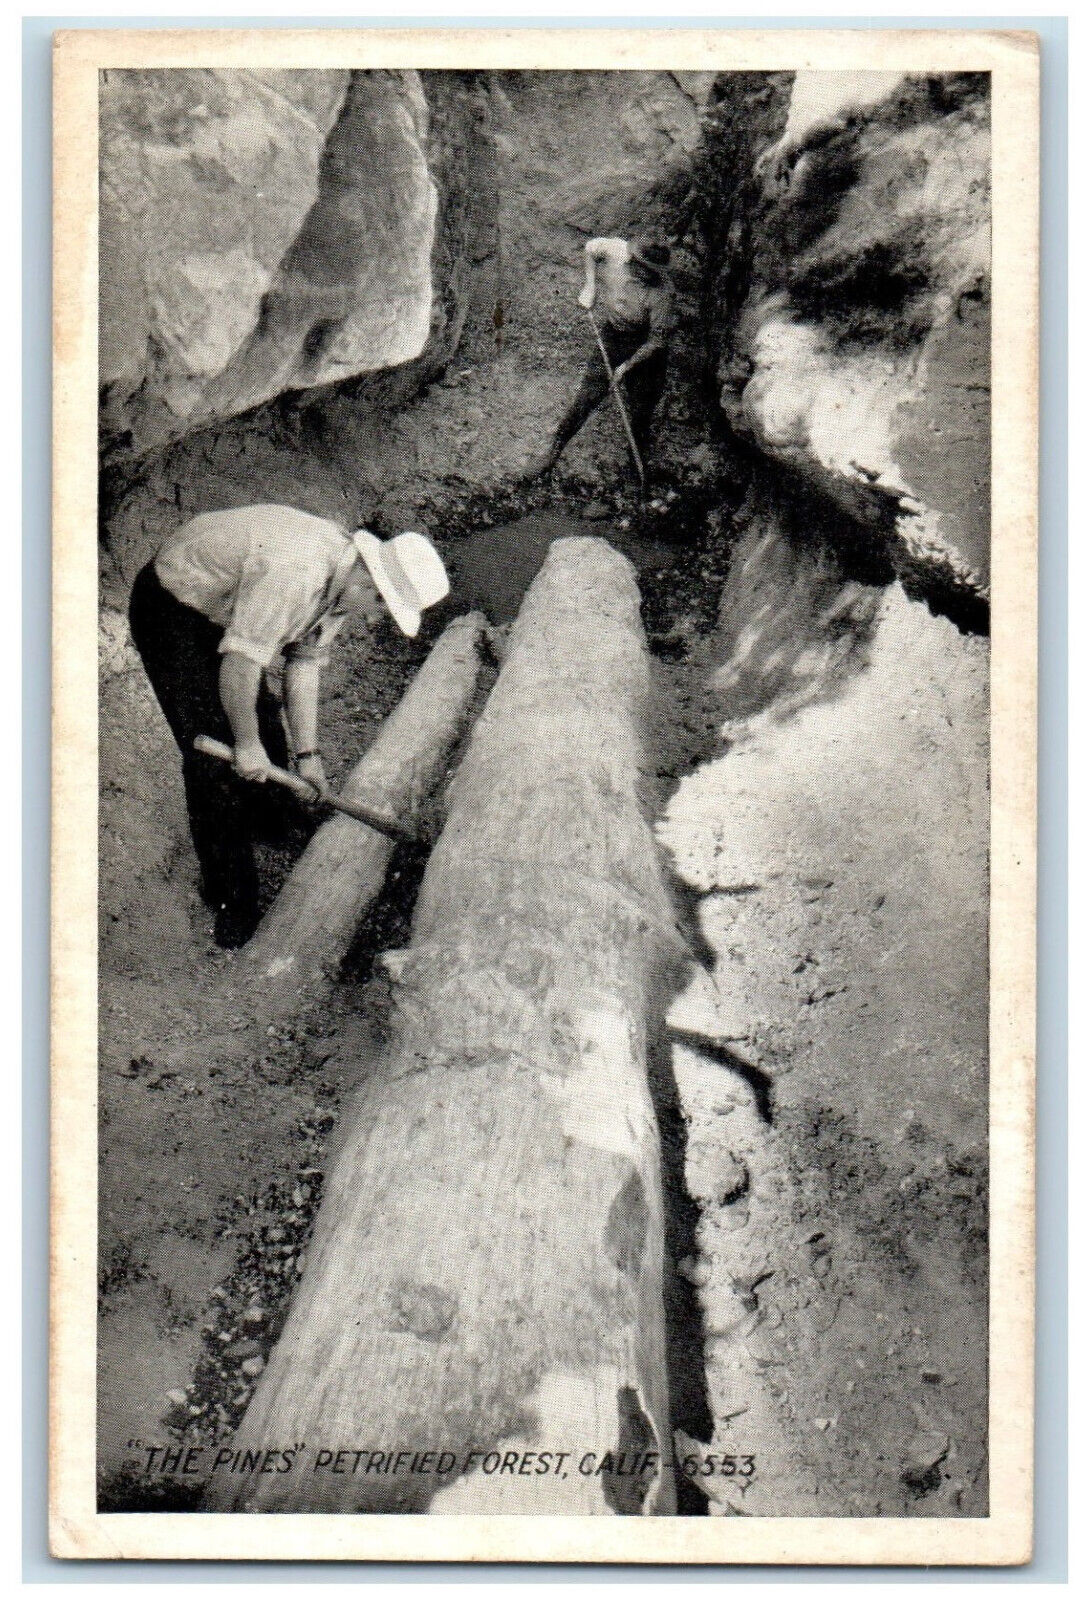 The Pines Petrified Forest Geologists Scene California CA Vintage Postcard